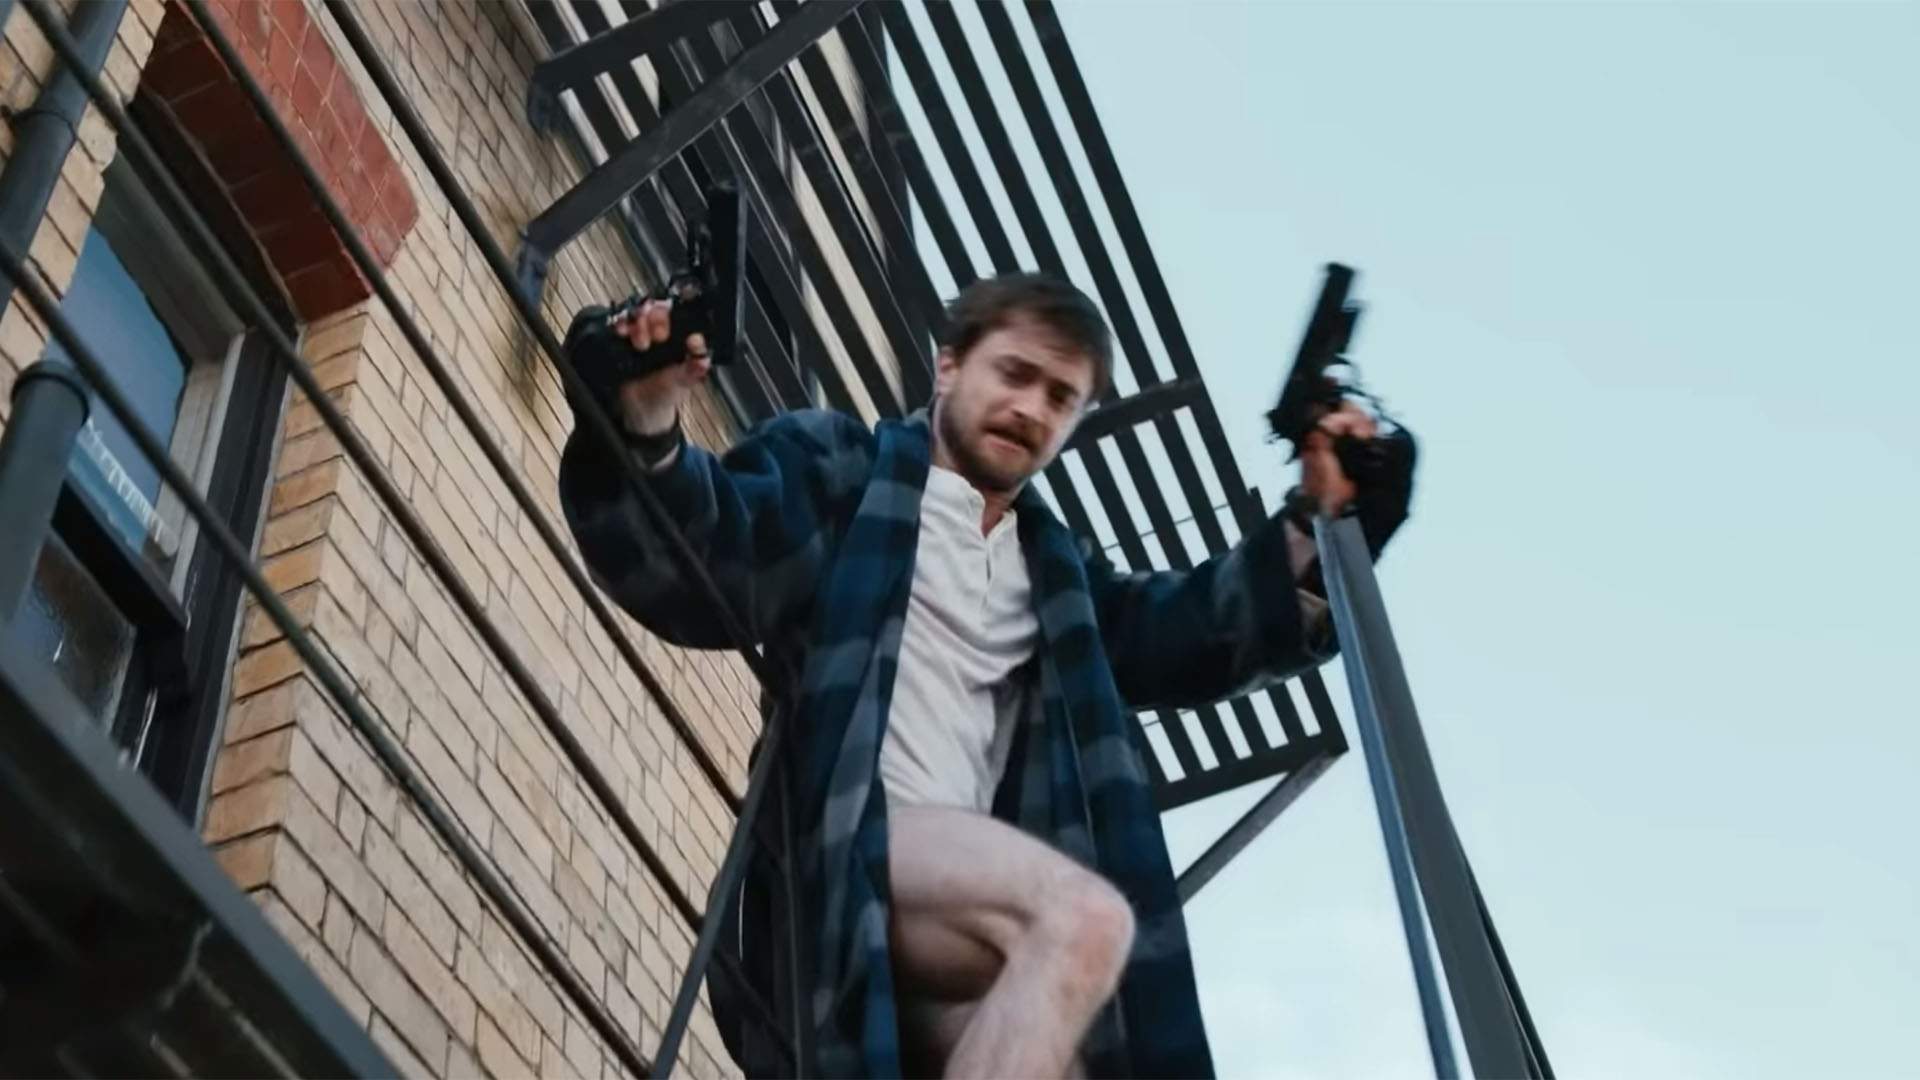 Daniel Radcliffe Fights for Survival with Guns Bolted to His Hands in the OTT Trailer for 'Guns Akimbo'